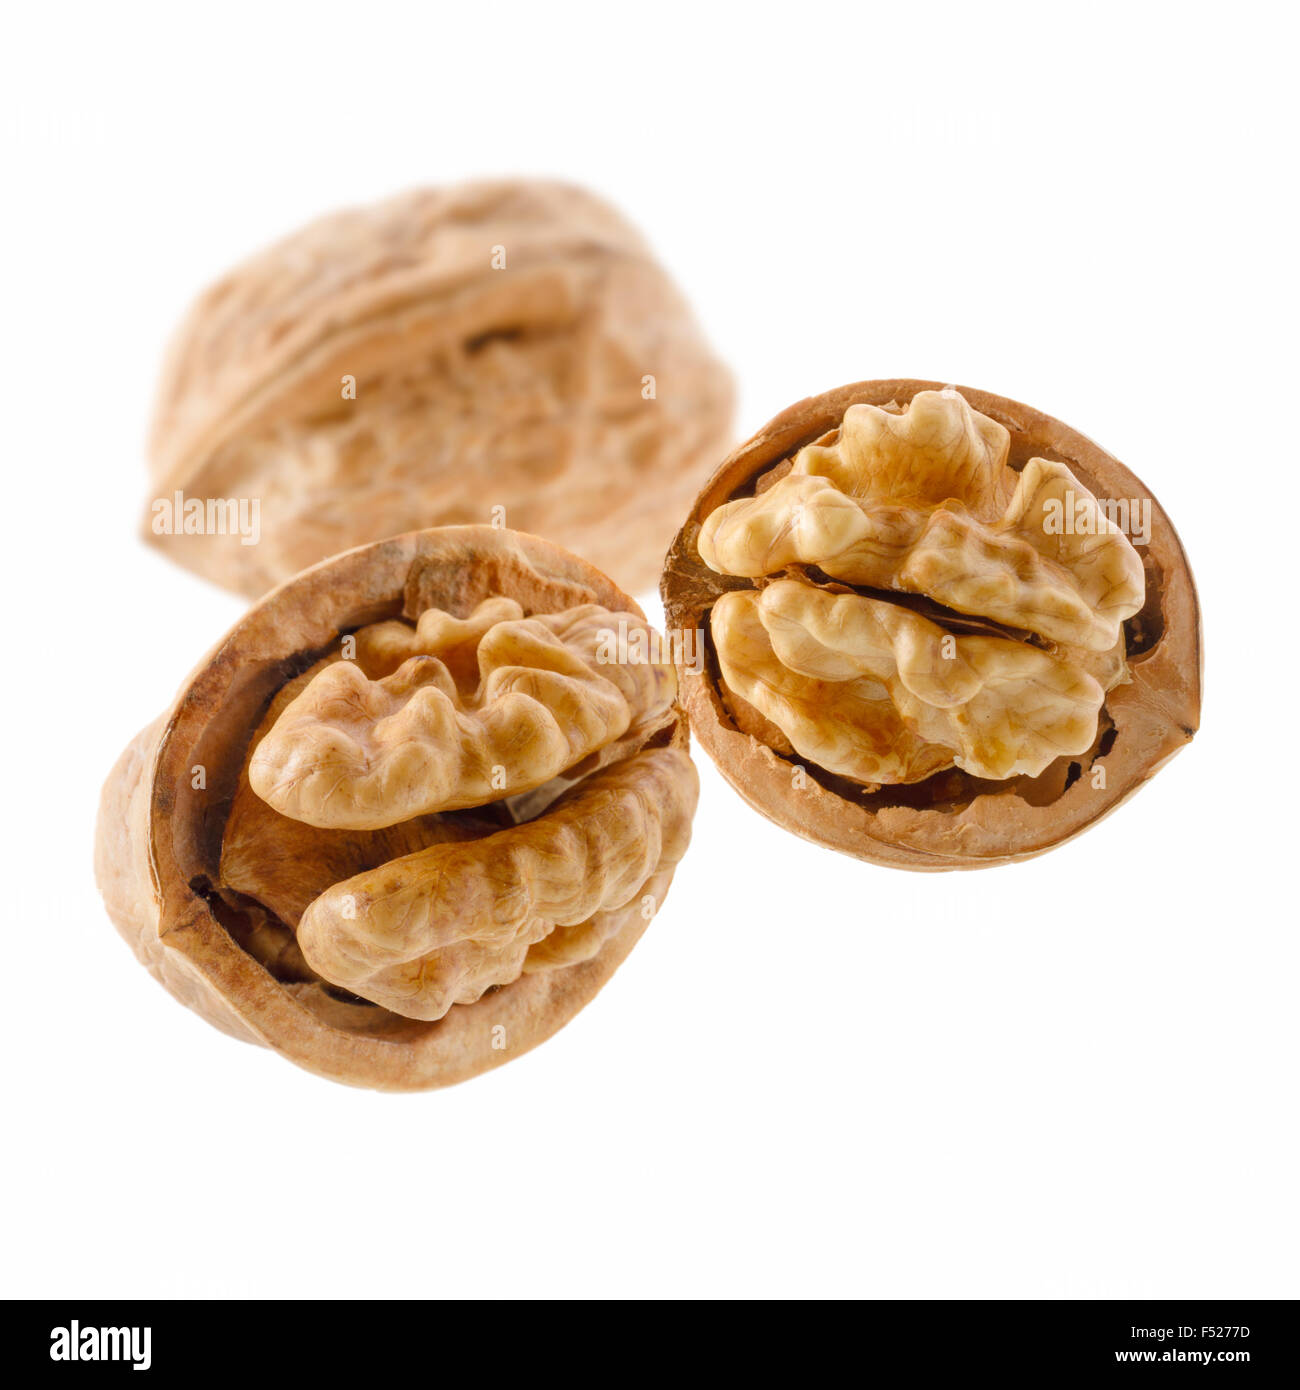 Food: group of walnuts, isolated on white background Stock Photo